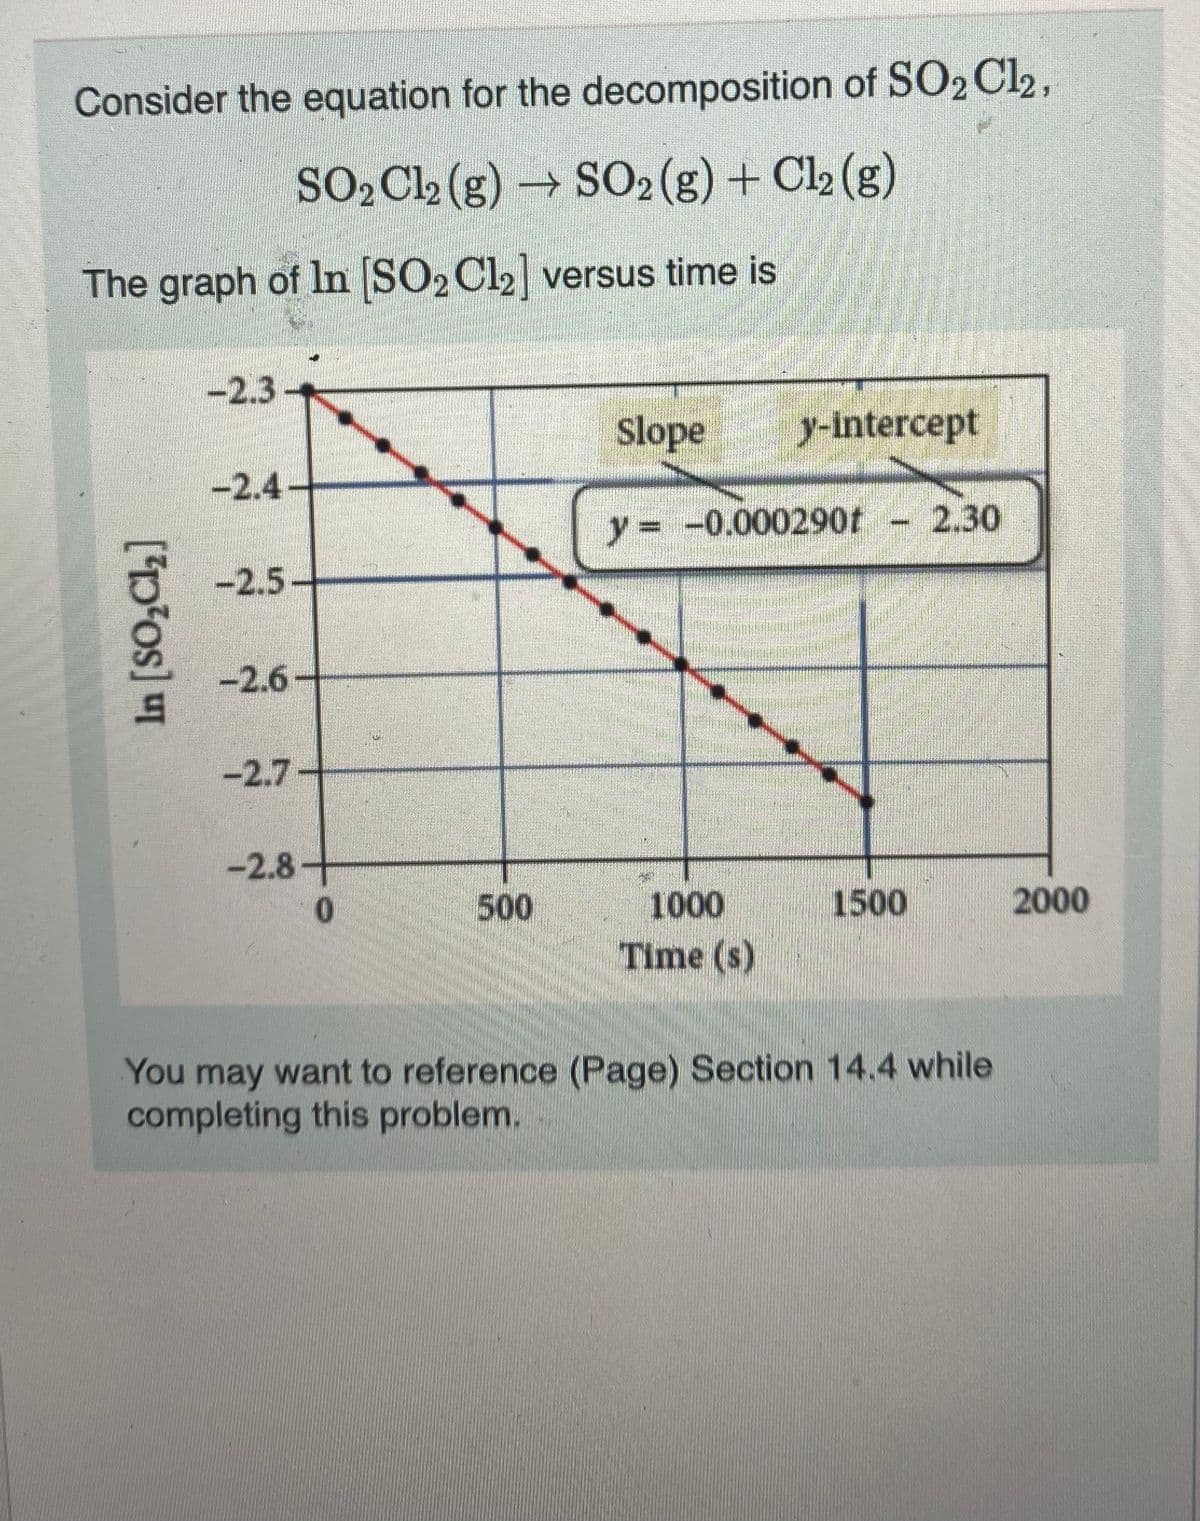 Consider the equation for the decomposition of SO2C22,
SO2Cl2 (g) → S02(g) + Cl2 (g)
The graph of In SO2 Cl2] versus time is
-2.3-
Slope
y-intercept
-2.4
y -0.000290t
2.30
-2.5
-2.6-
-2.7
-2.8+
0.
500
1000
1500
2000
Time (s)
You may want to reference (Page) Section 14.4 while
completing this problem.
In [SO,Cl]
